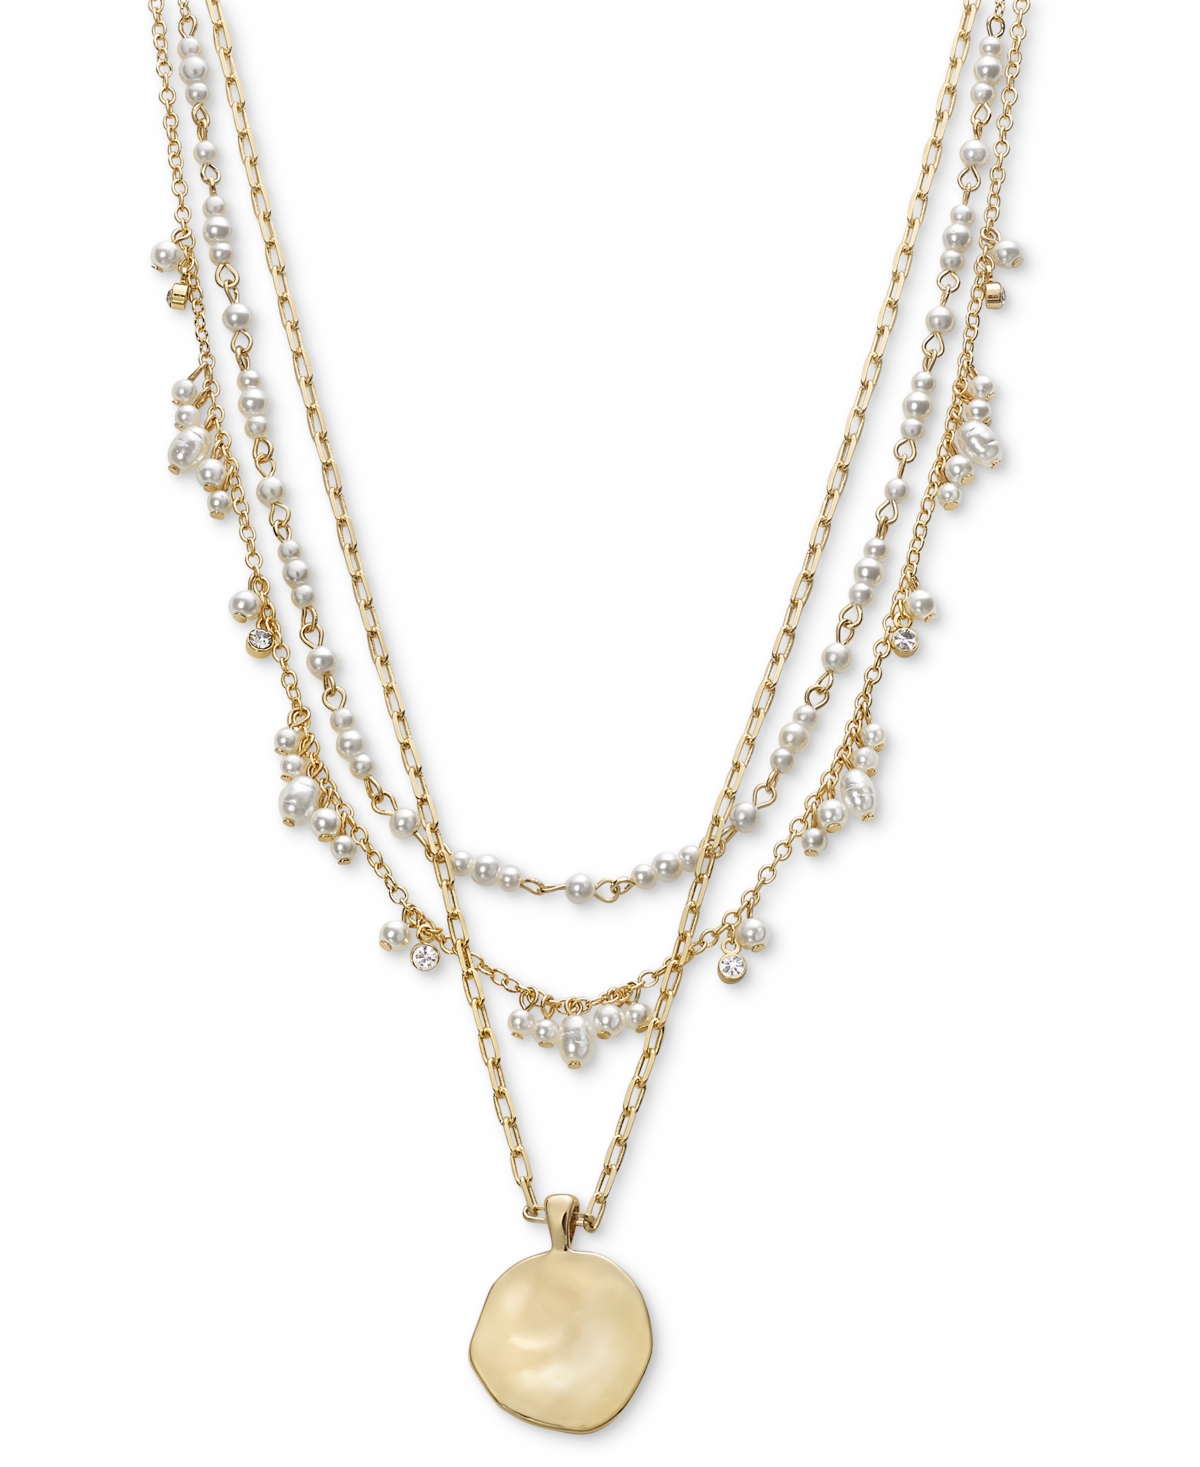 Gold-Tone Layered Pendant Necklace, 17" +3" extender, Created for Macy's - White